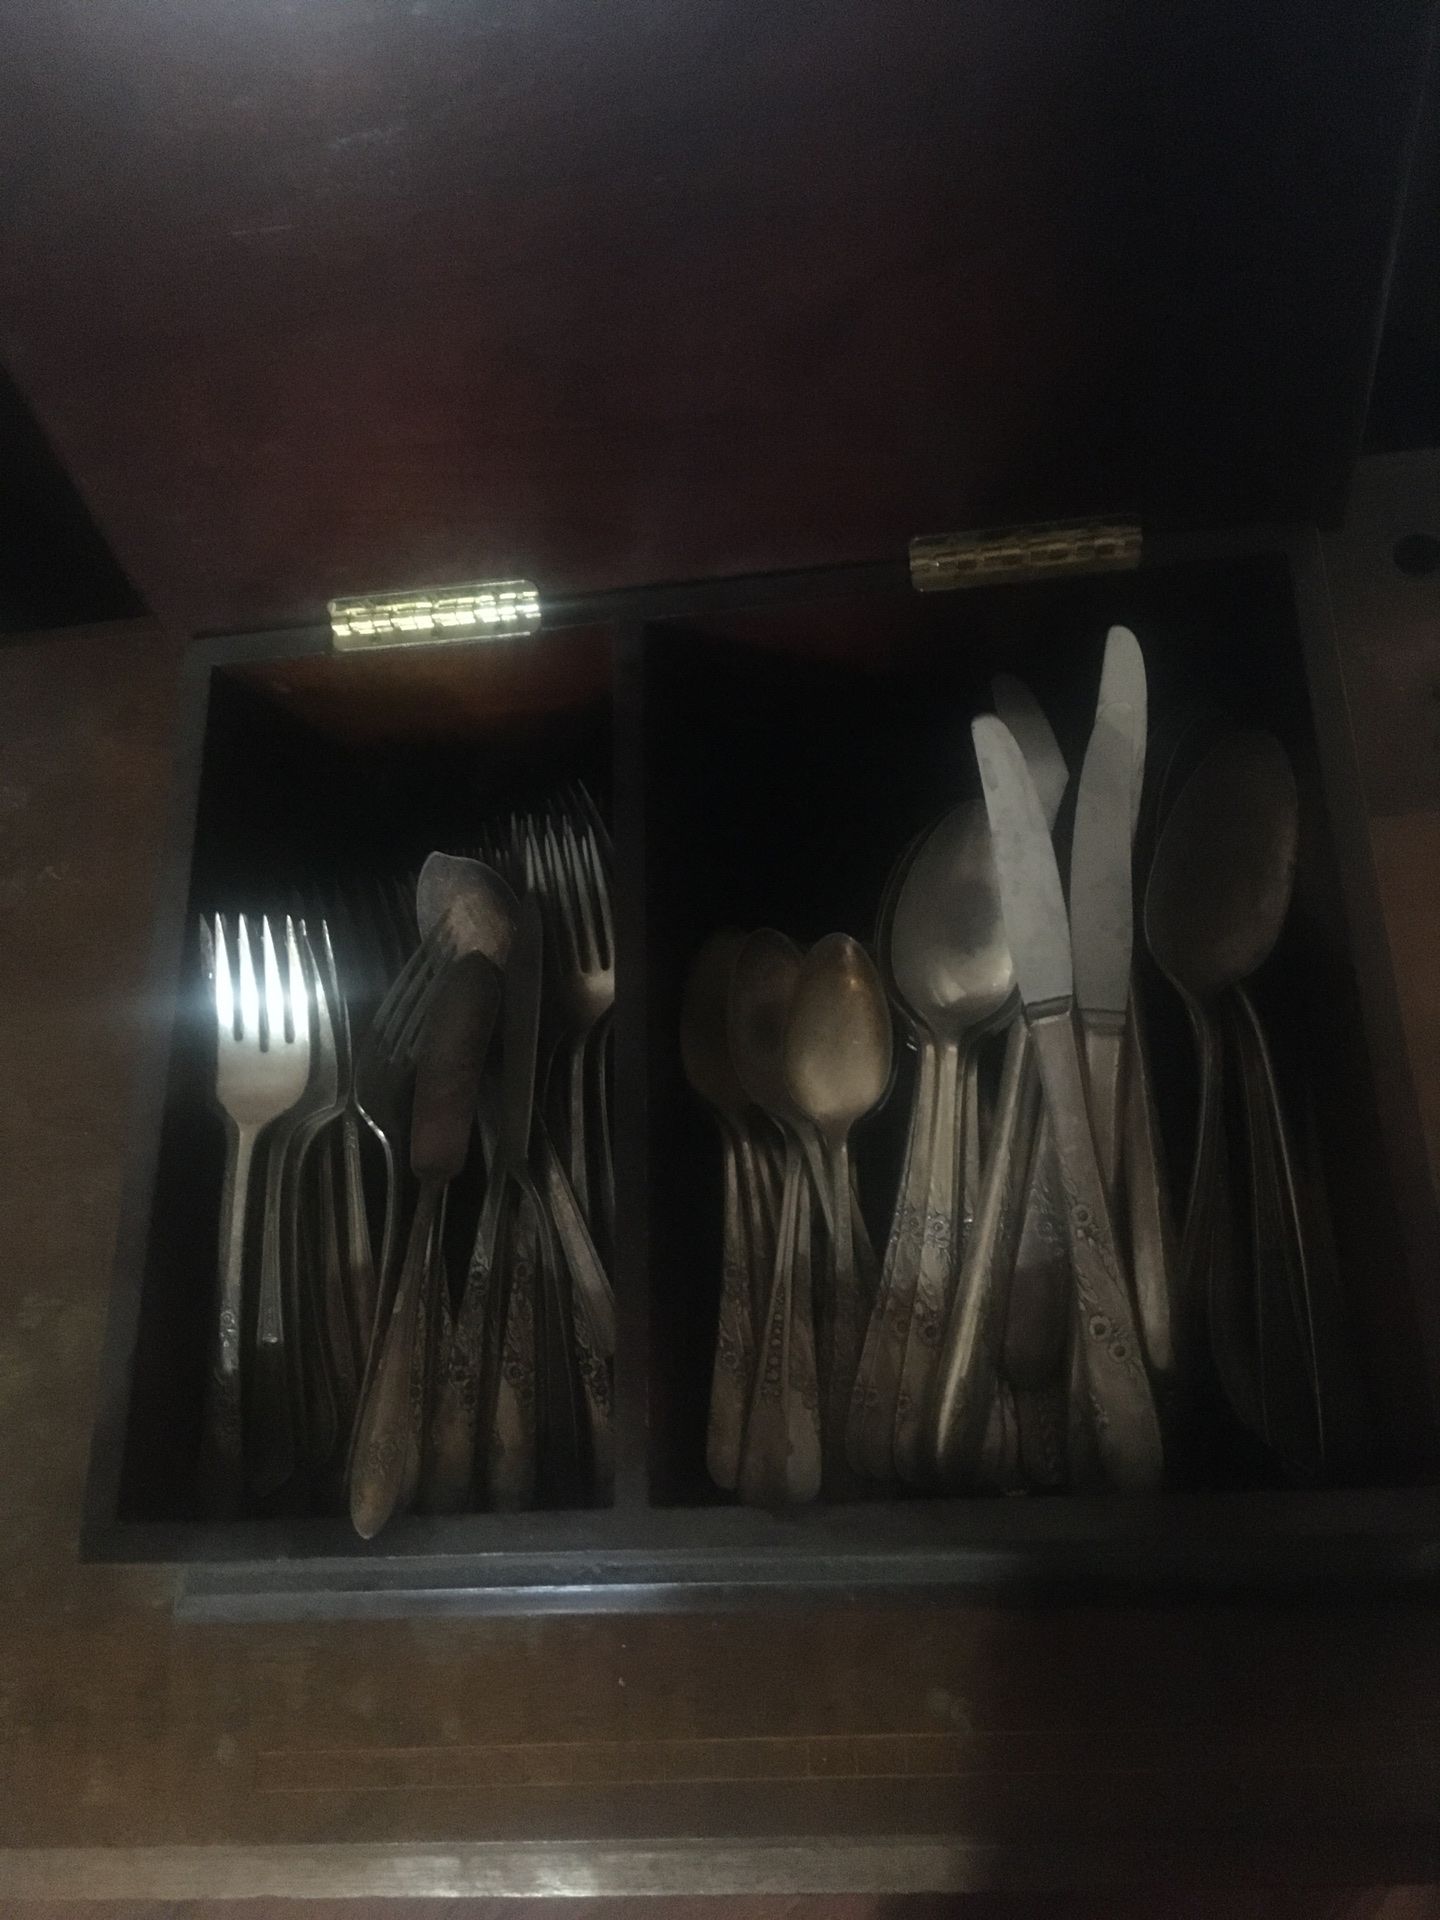 Silverware from the 40s